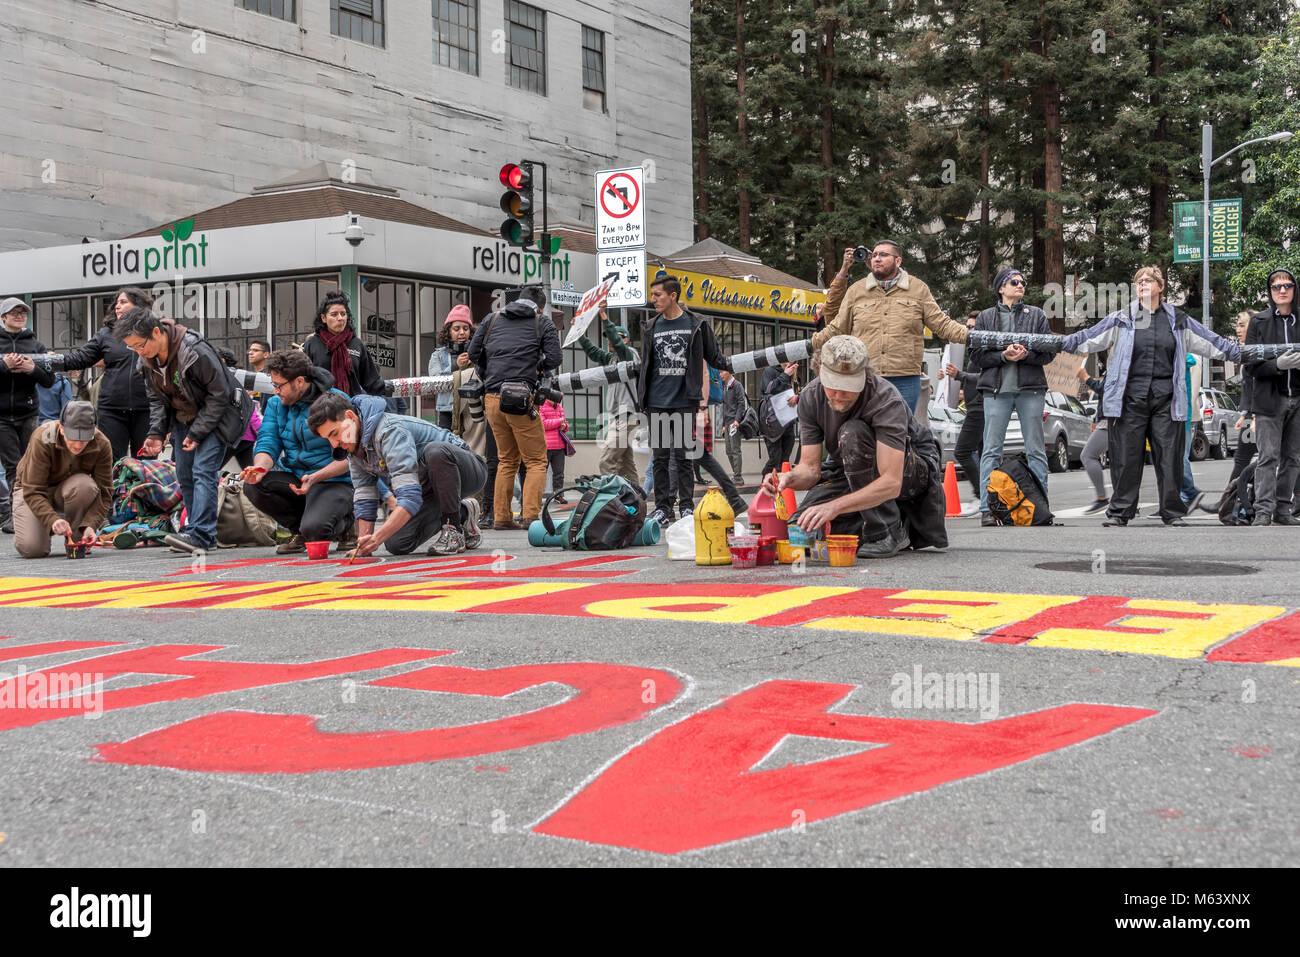 San Francisco, USA. 28th February, 2018. An estimated three hundred protesters gather outside San Francisco Immigration and Customs Enforcement building (ICE) to protest recent arrests of at least 150 people in ICE operations conducted over the previous few days in Northern California. San Francisco remains a sanctuary city. Shelly Rivoli/Alamy Live News Stock Photo